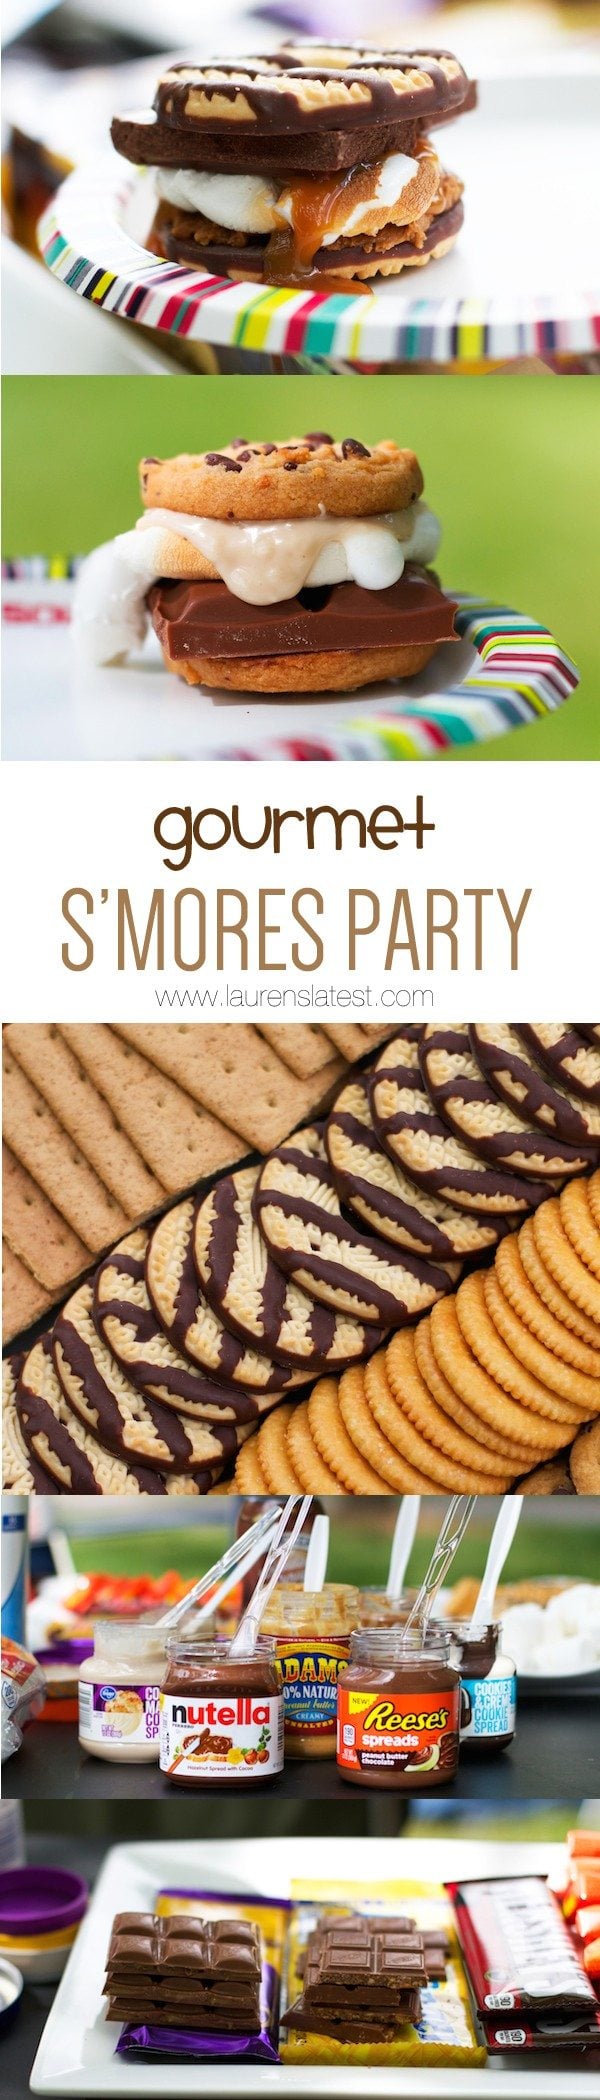 Gourmet S'mores Bar Party